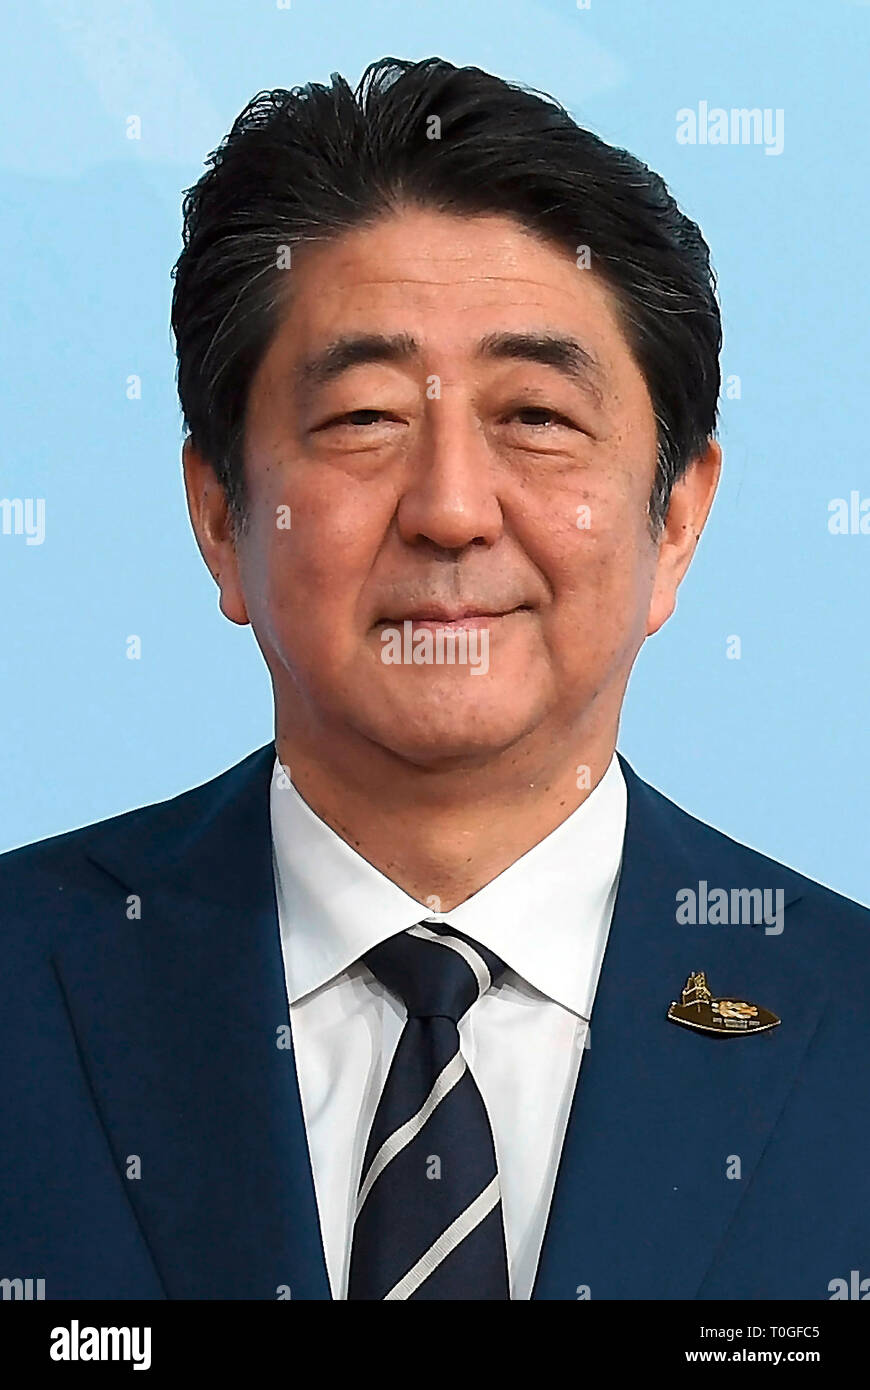 Shinzo Abe - * 21.09.1954 - Japanese politician, Prime Minister of Japan and Leader of the Liberal Democratic Party of Japan LDP. Stock Photo